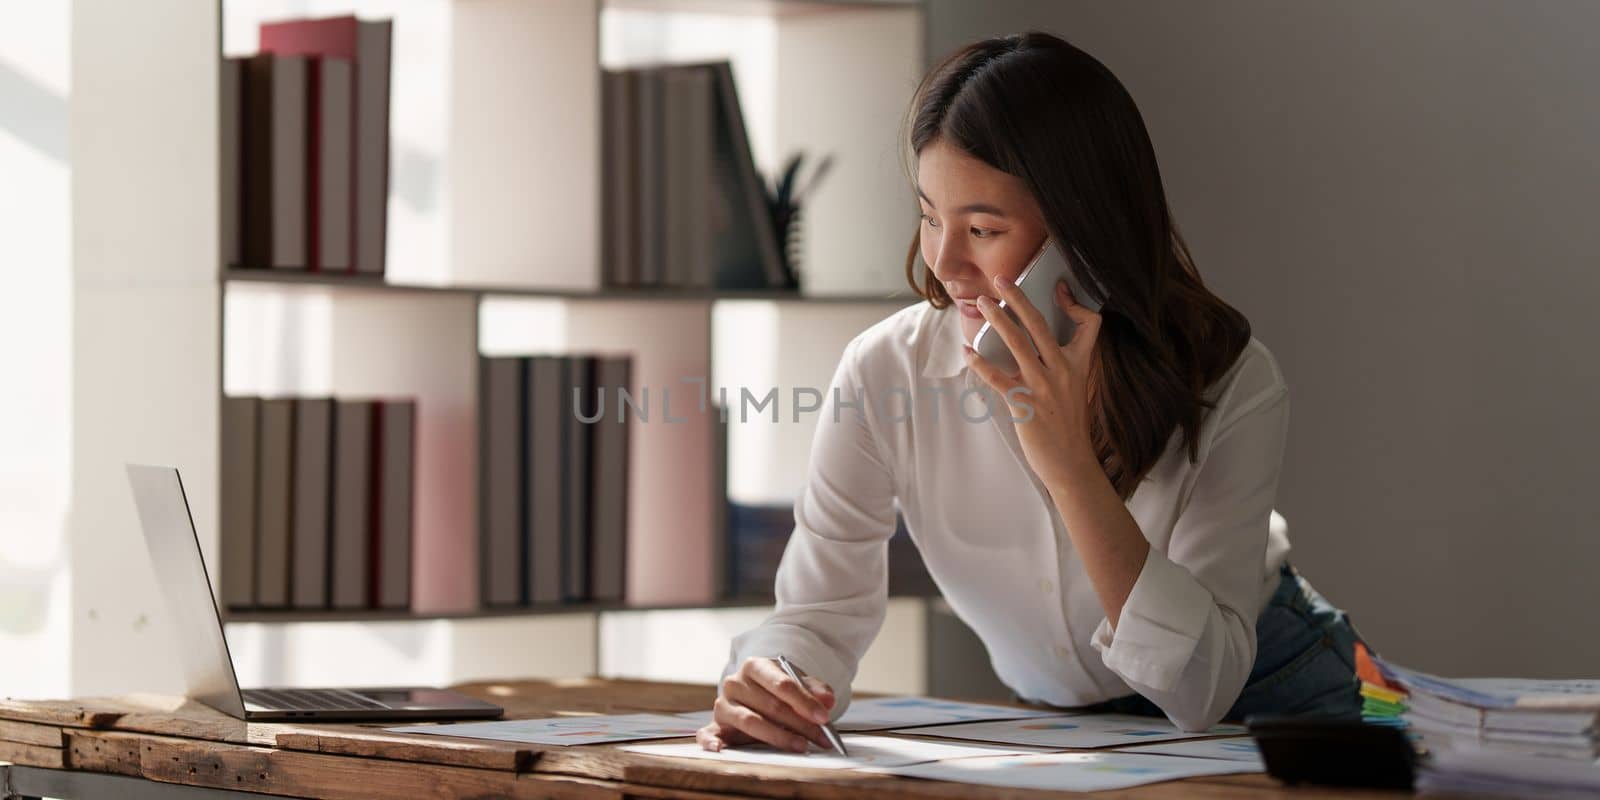 Beautiful business woman talking on the mobile phone. Management, planning and networking phone call concept by itchaznong